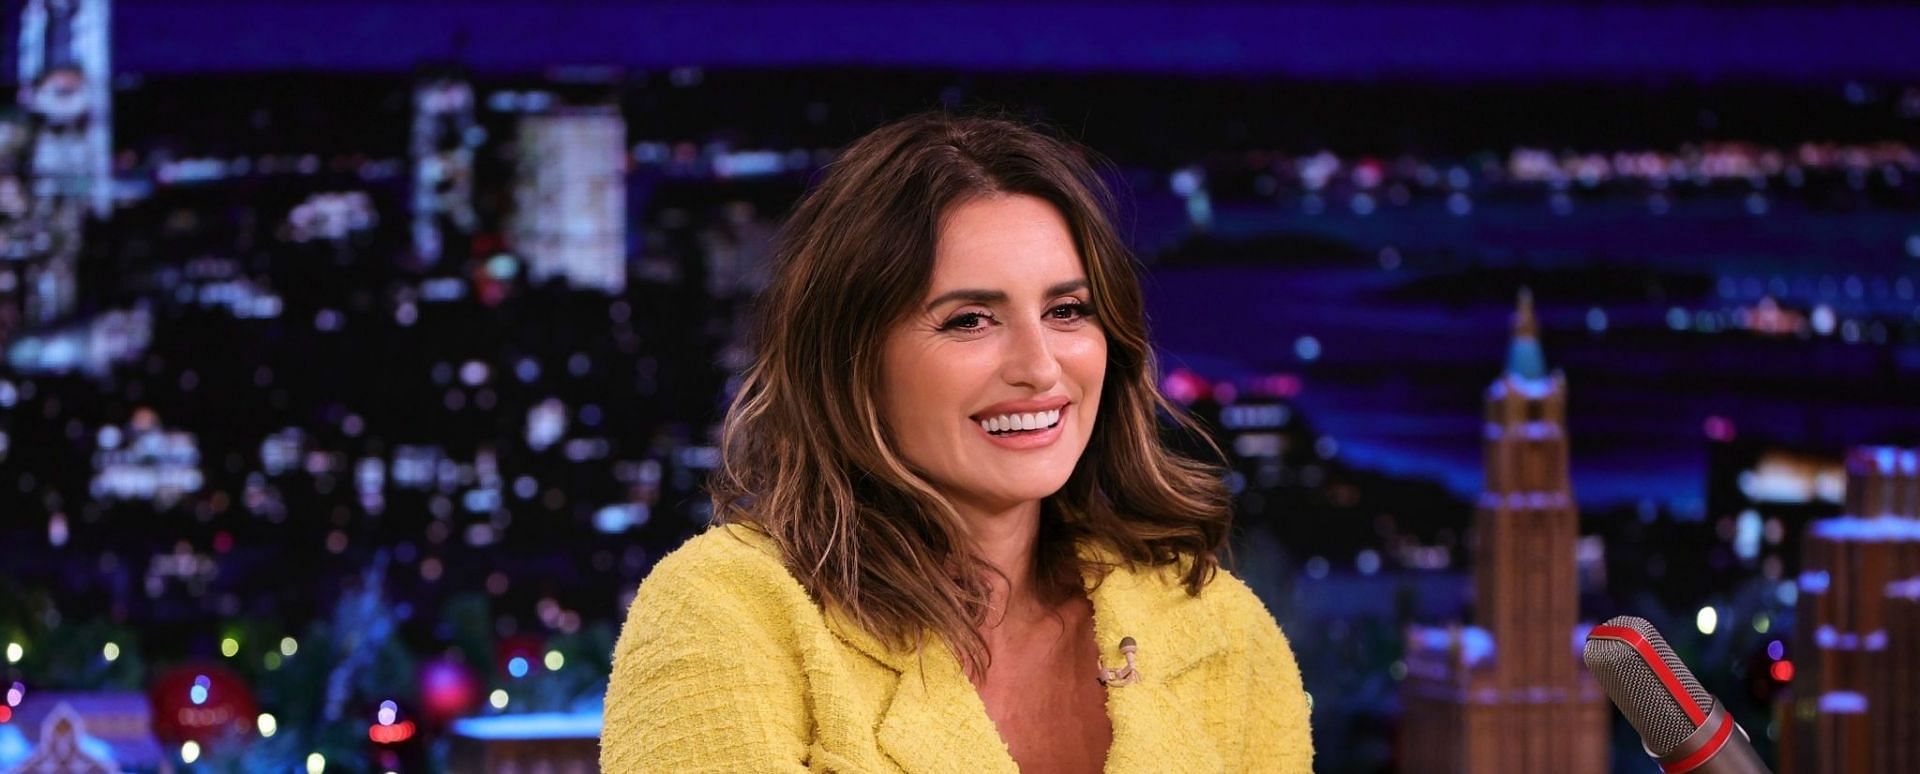 Penelope Cruz is a proud mother to two children (Image via NBC/The Tonight Show Starring Jimmy Fallon)